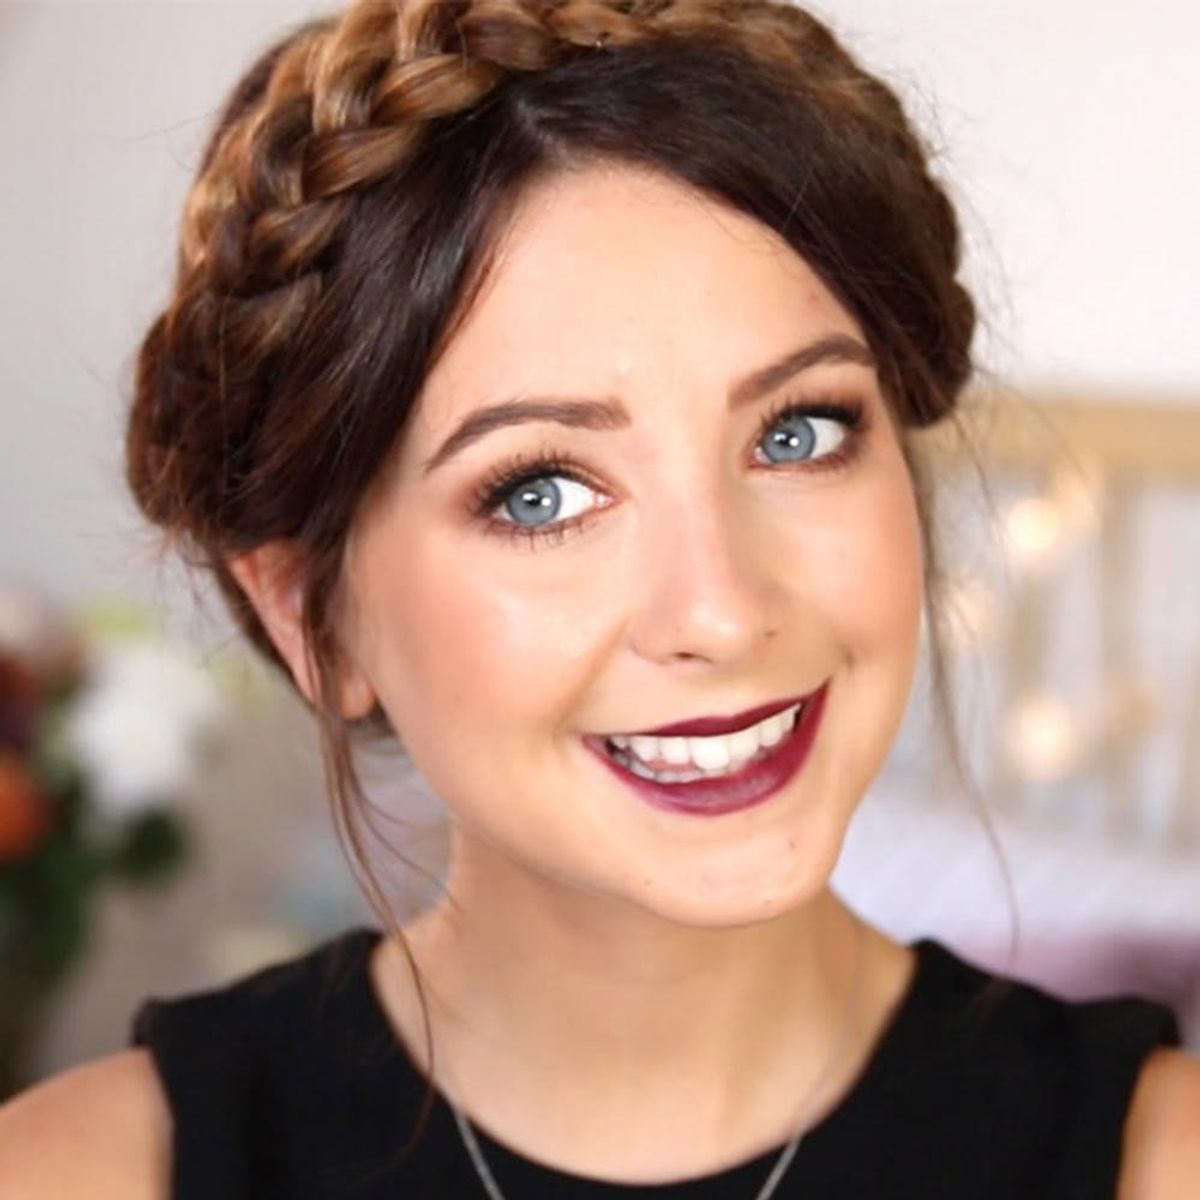 Tune in to These 24 Celebrity YouTubers